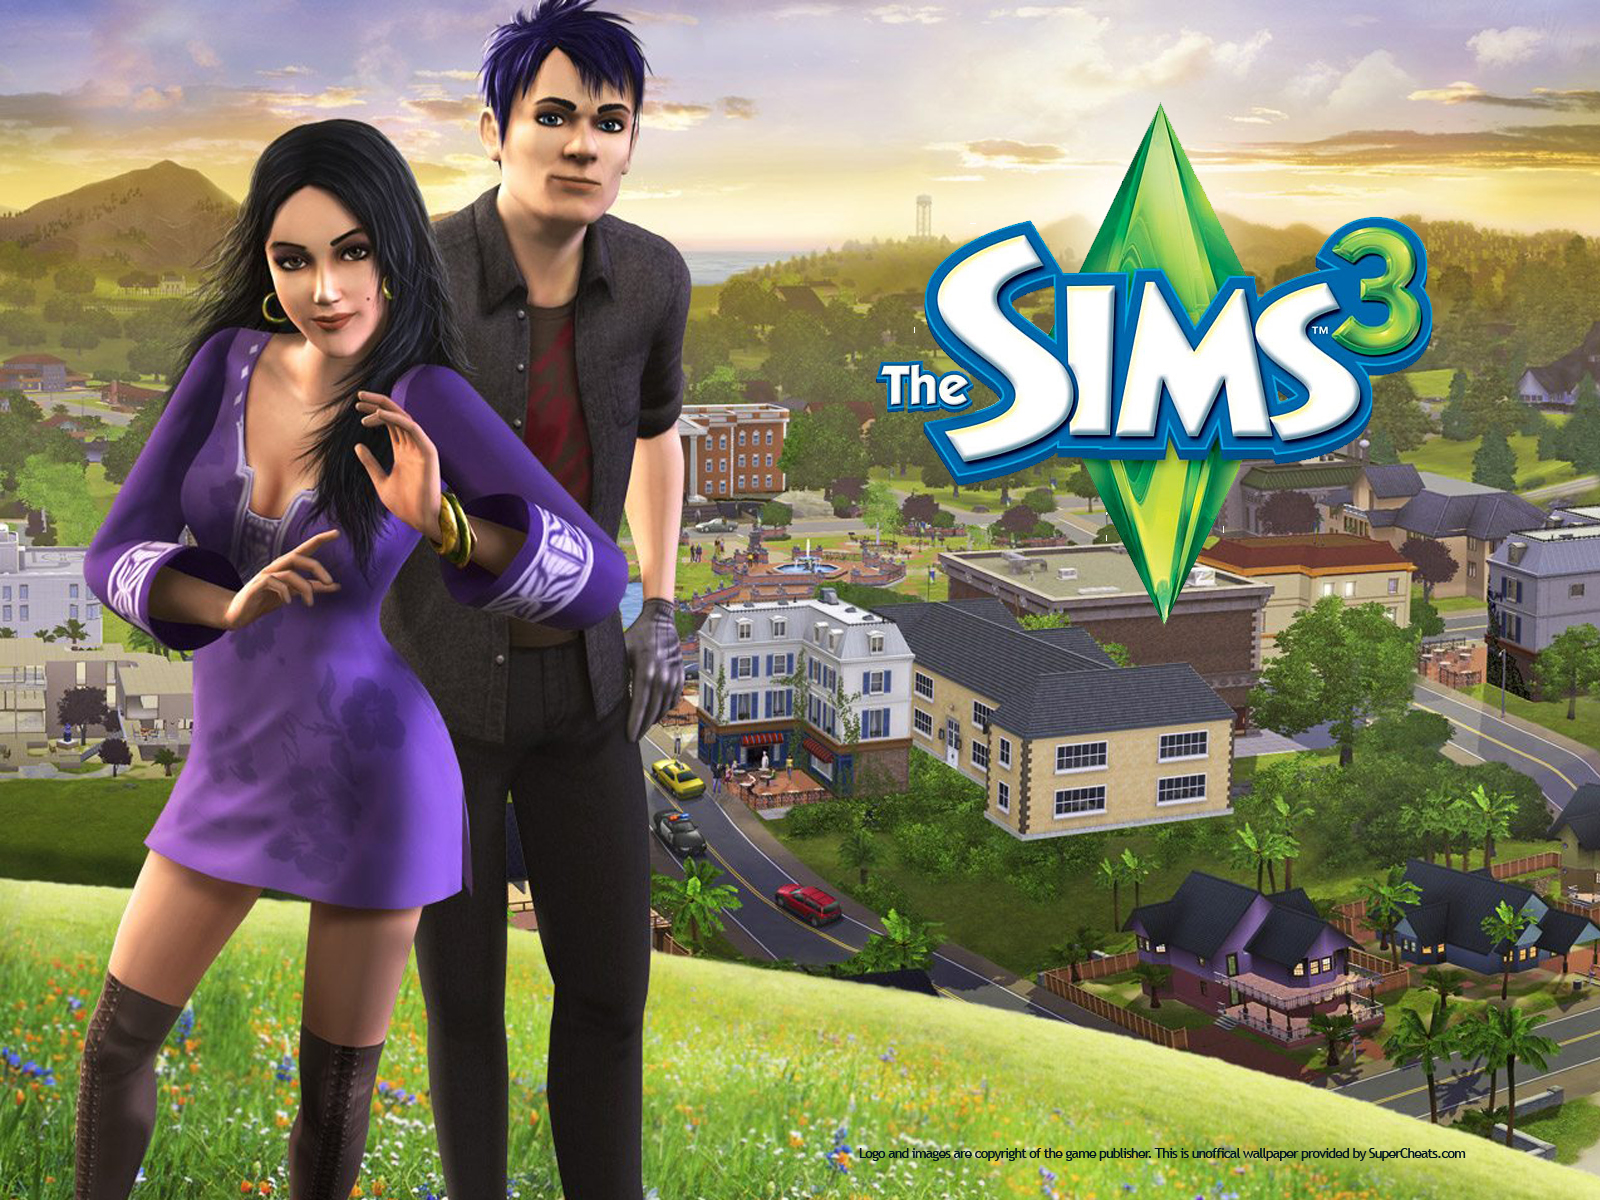 3d new ru. The SIMS 3. The SIMS 3 Electronic Arts. SIMS 3 SIMS 4. Симс 3 компьютерная версия.